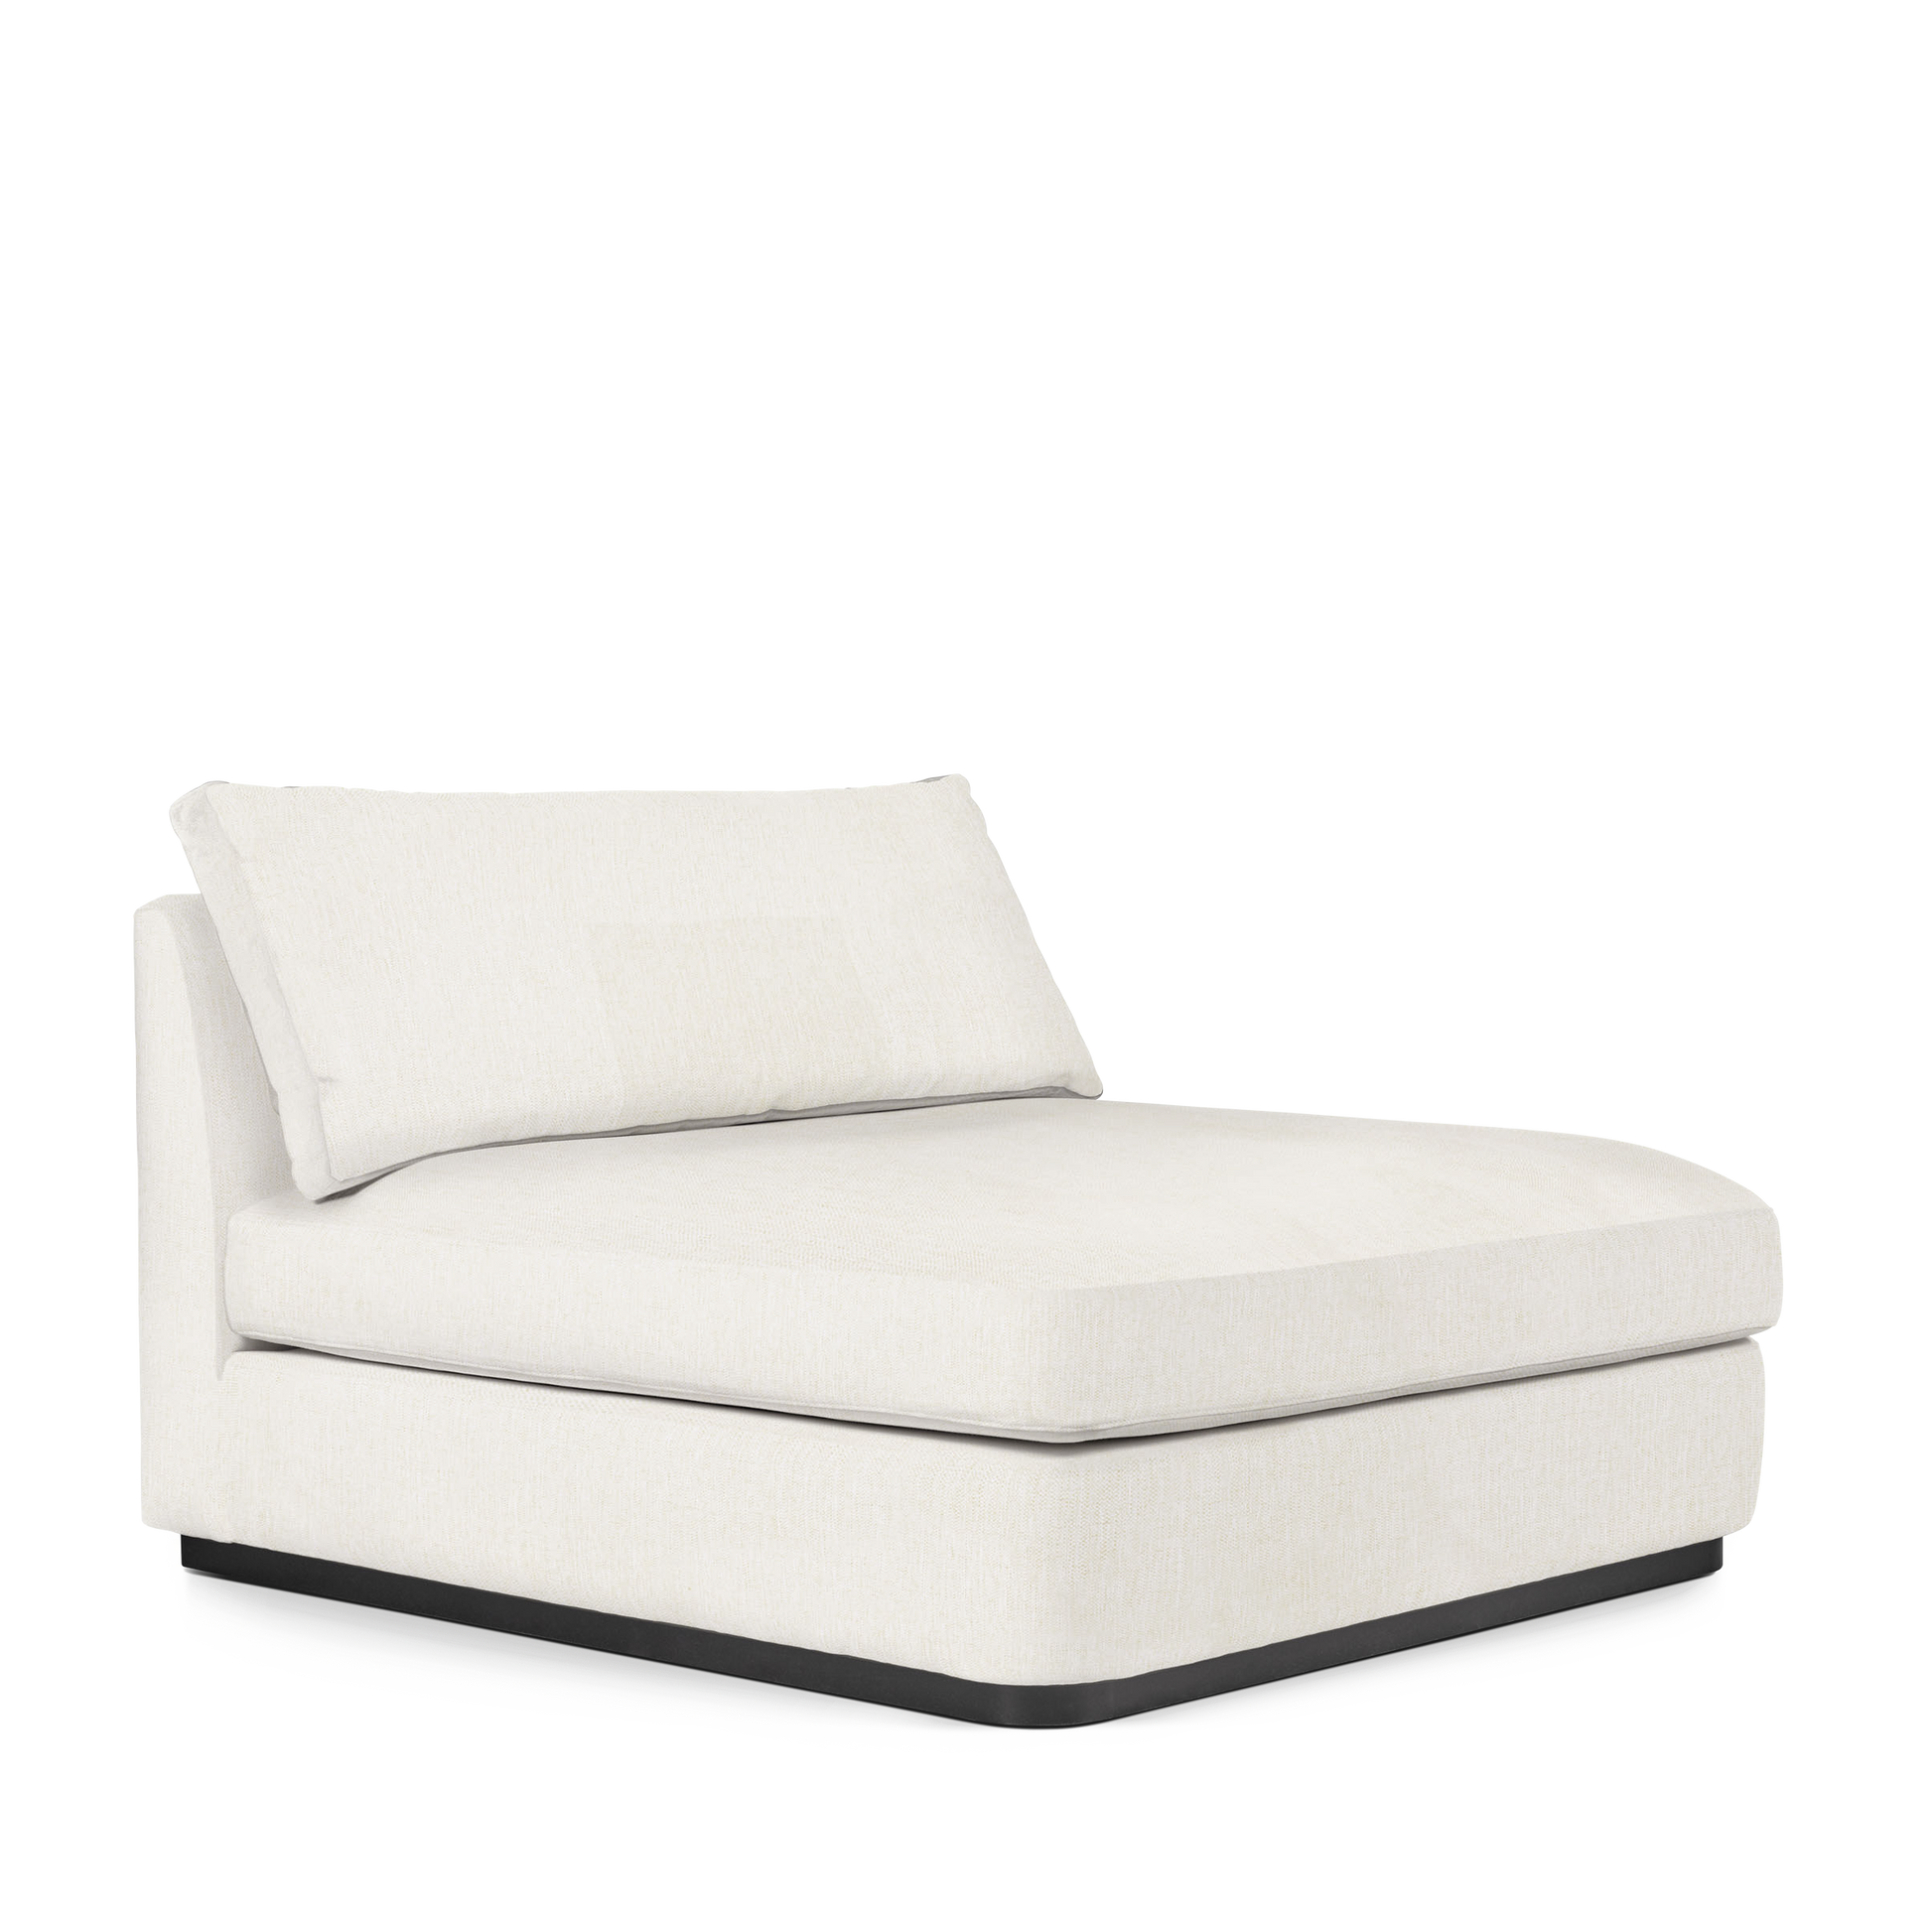 CALMA Lounge Bed with bolt white textile 